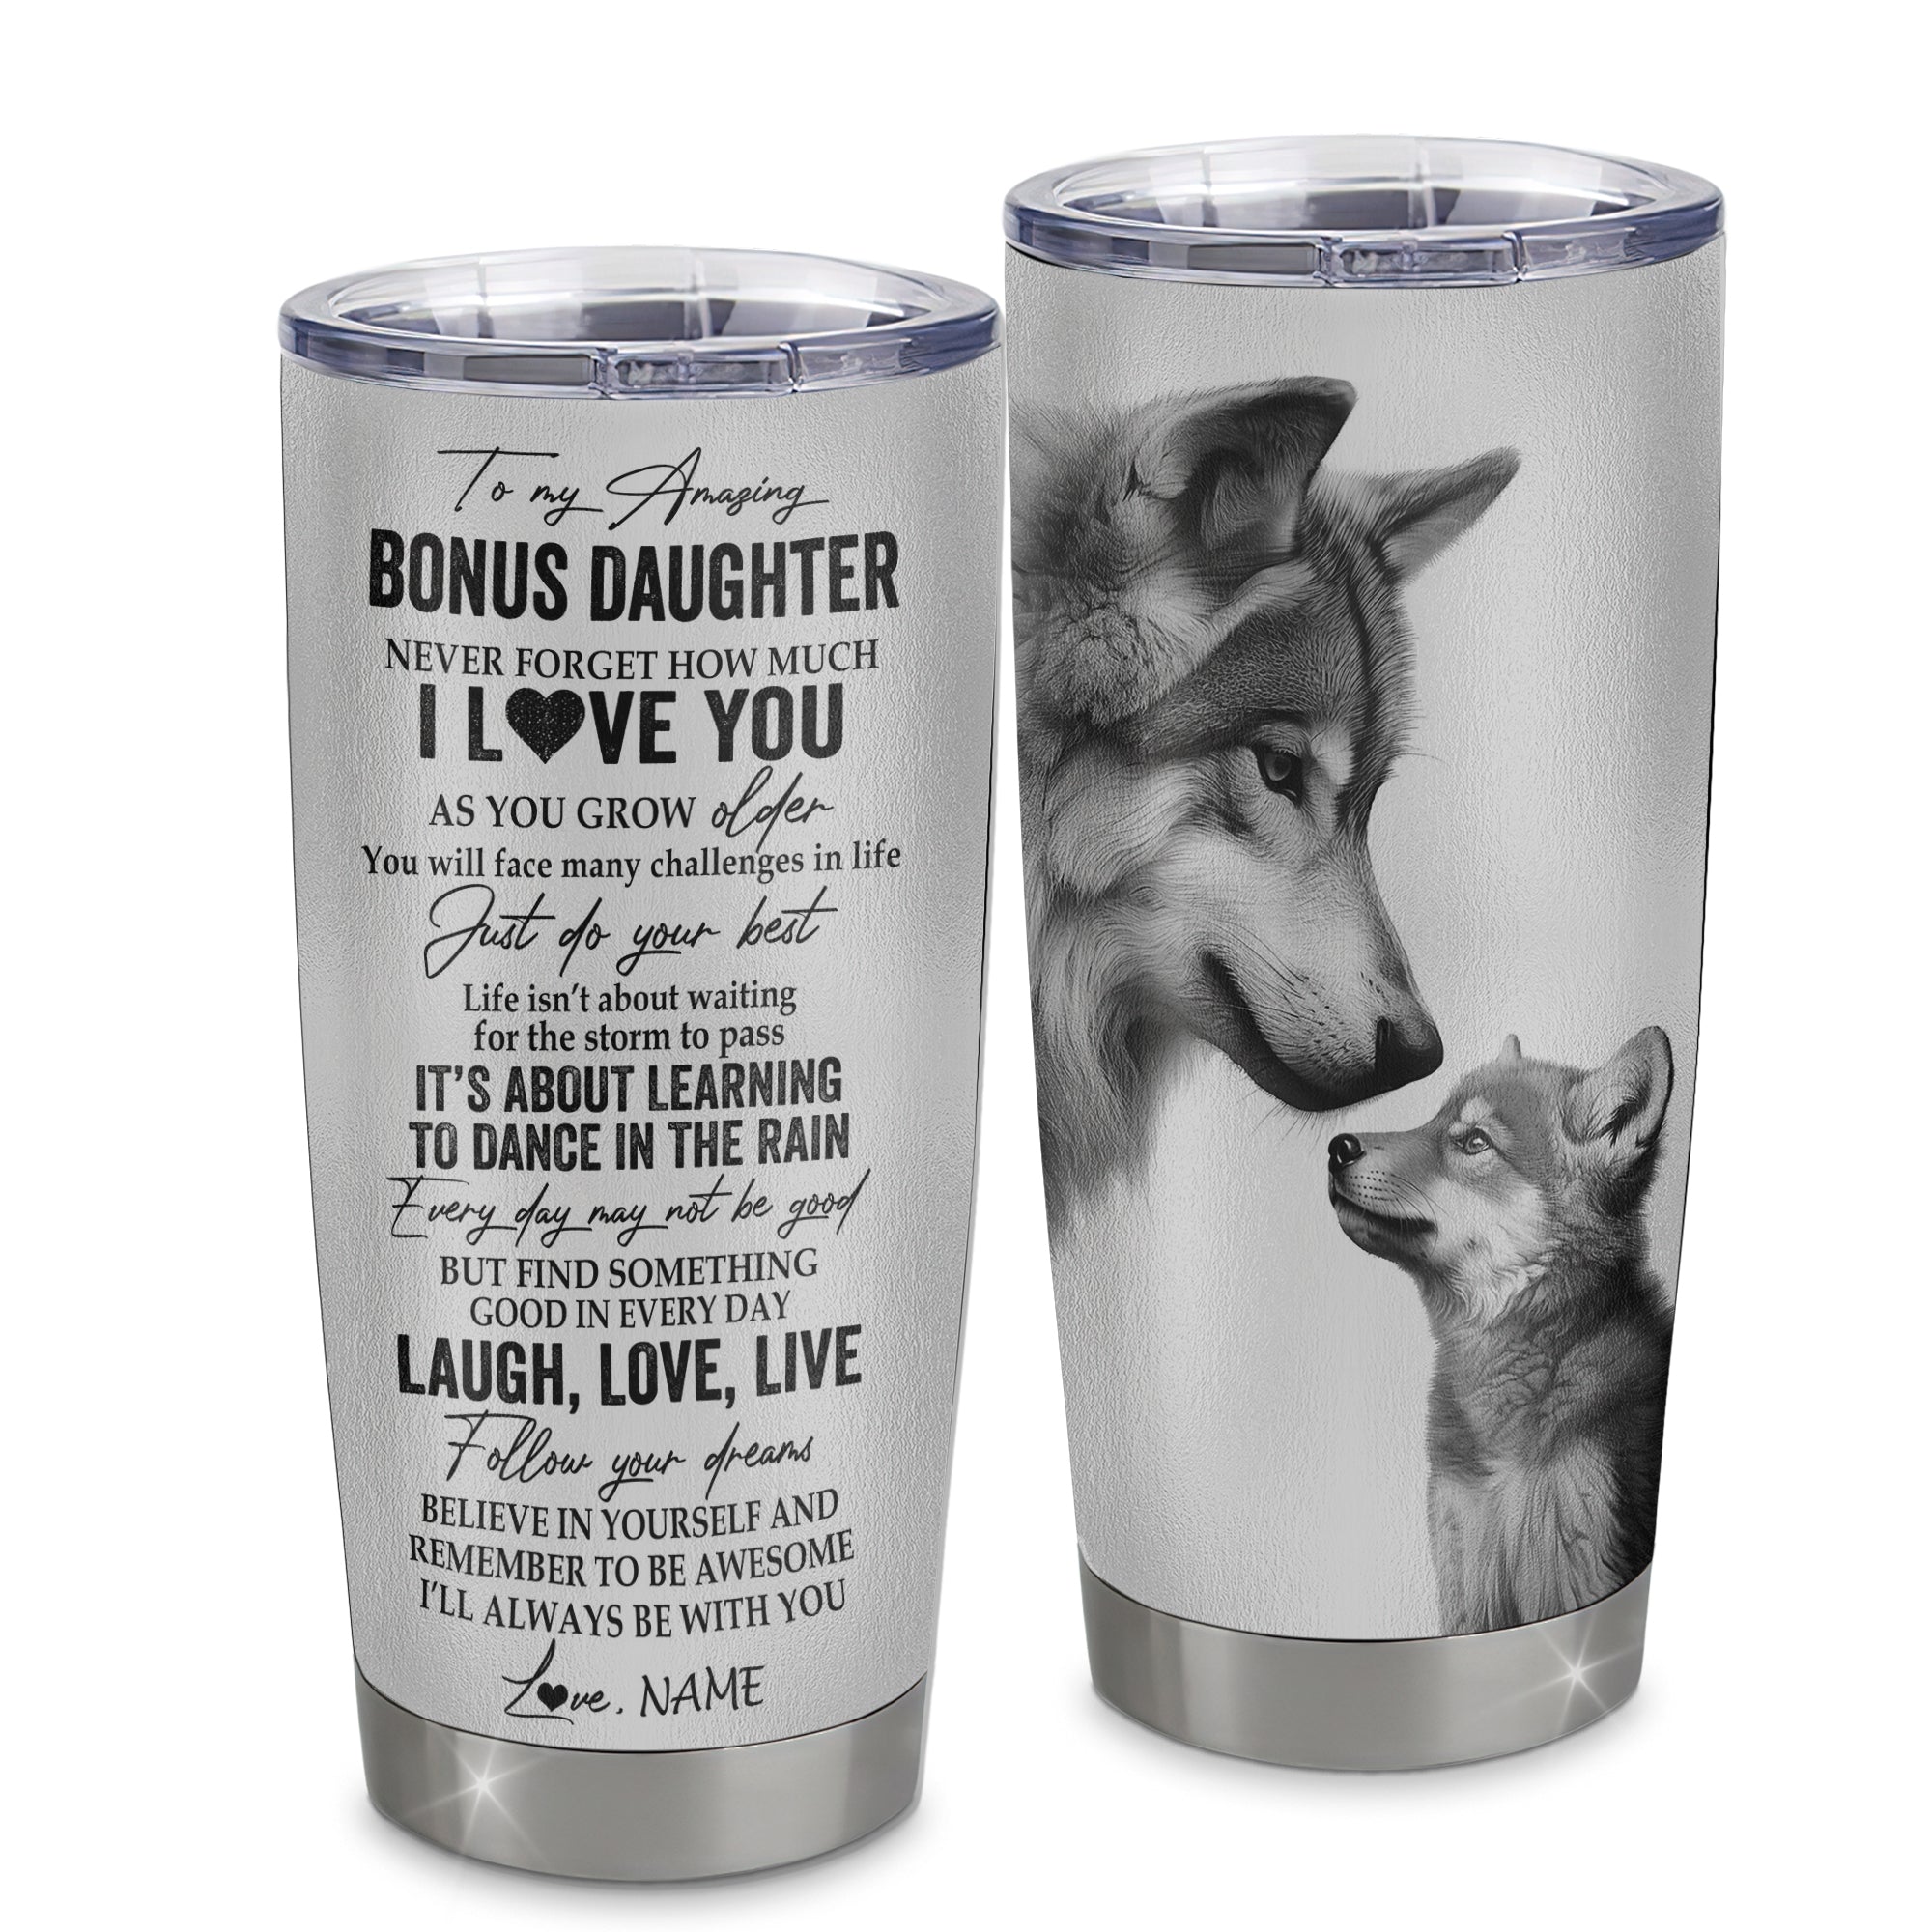 Personalized_To_My_Bonus_Daughter_Tumbler_From_Stepmother_Stainless_Steel_Cup_Just_Do_You_Best_Laugh_Love_Live_Wolf_Stepdaughter_Birthday_Christmas_Travel_Mug_Tumbler_mockup_1.jpg